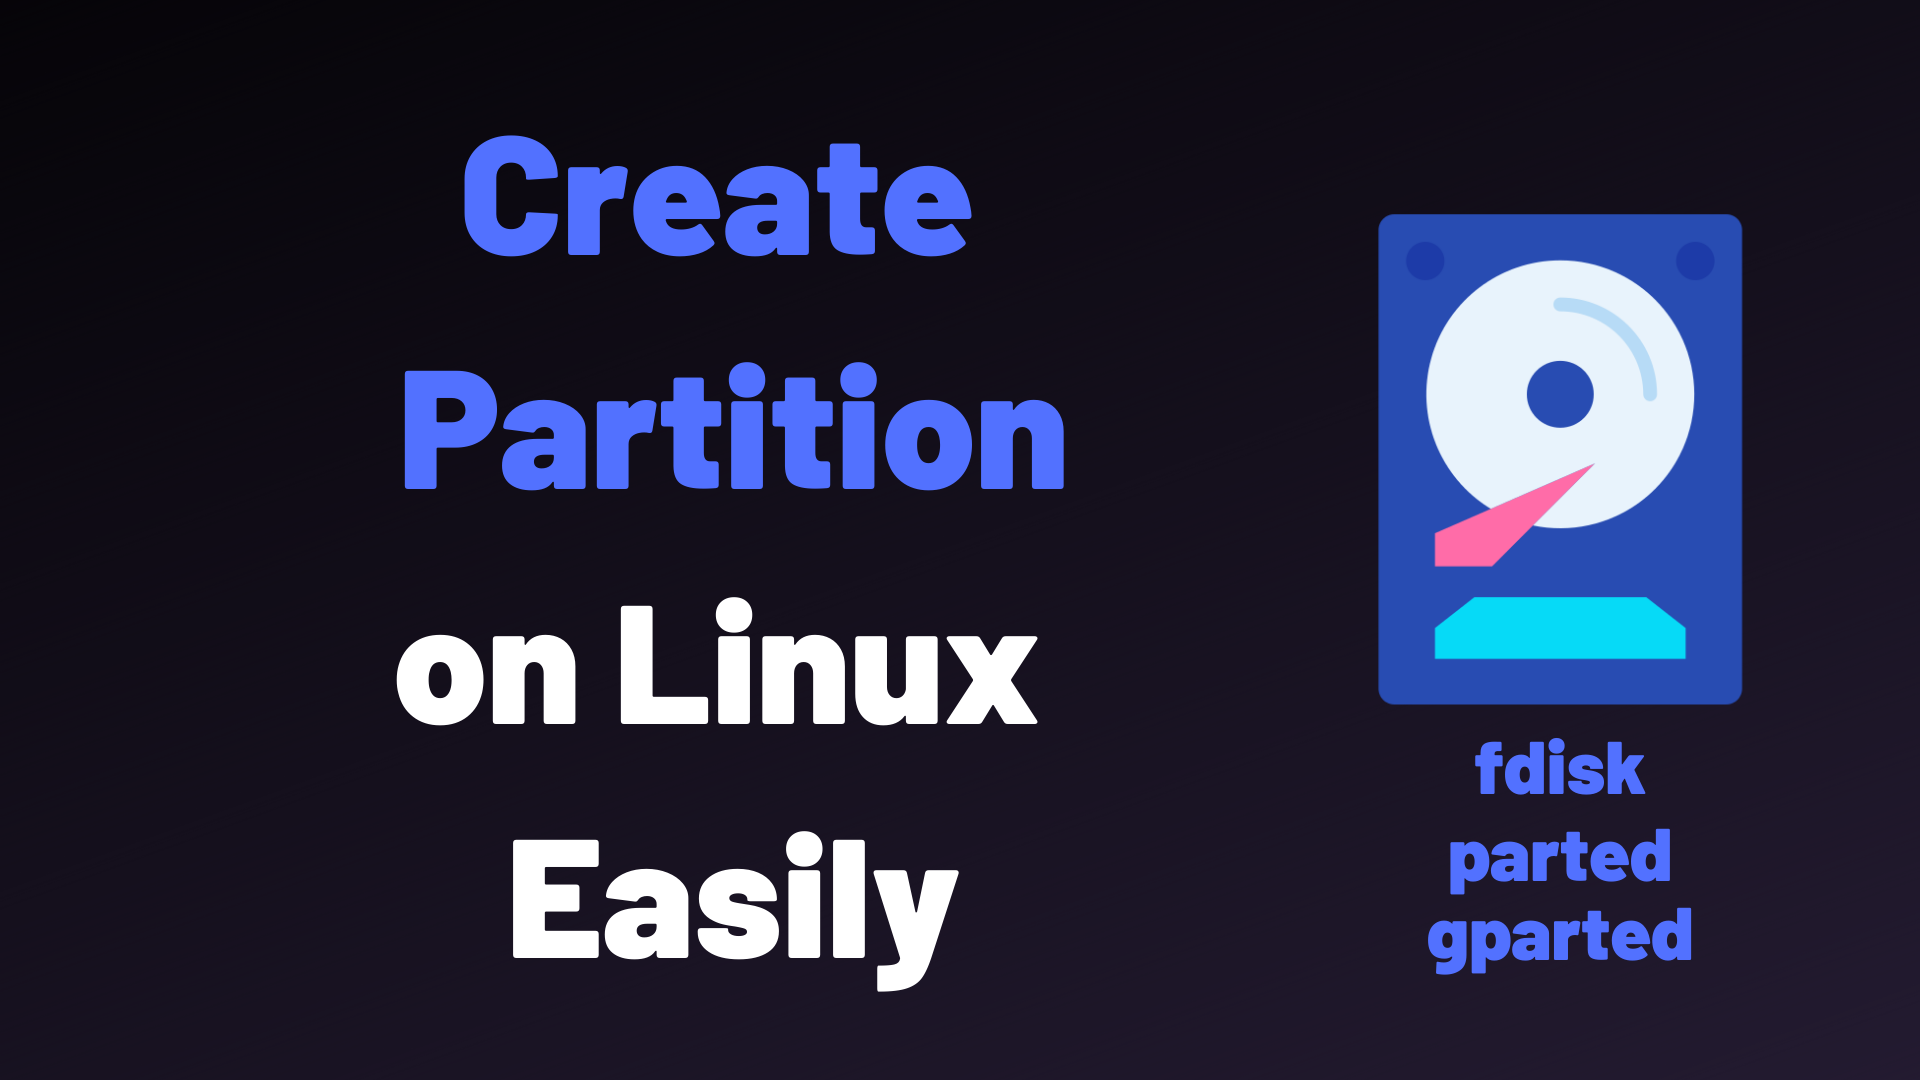 How To Create Disk Partitions on Linux